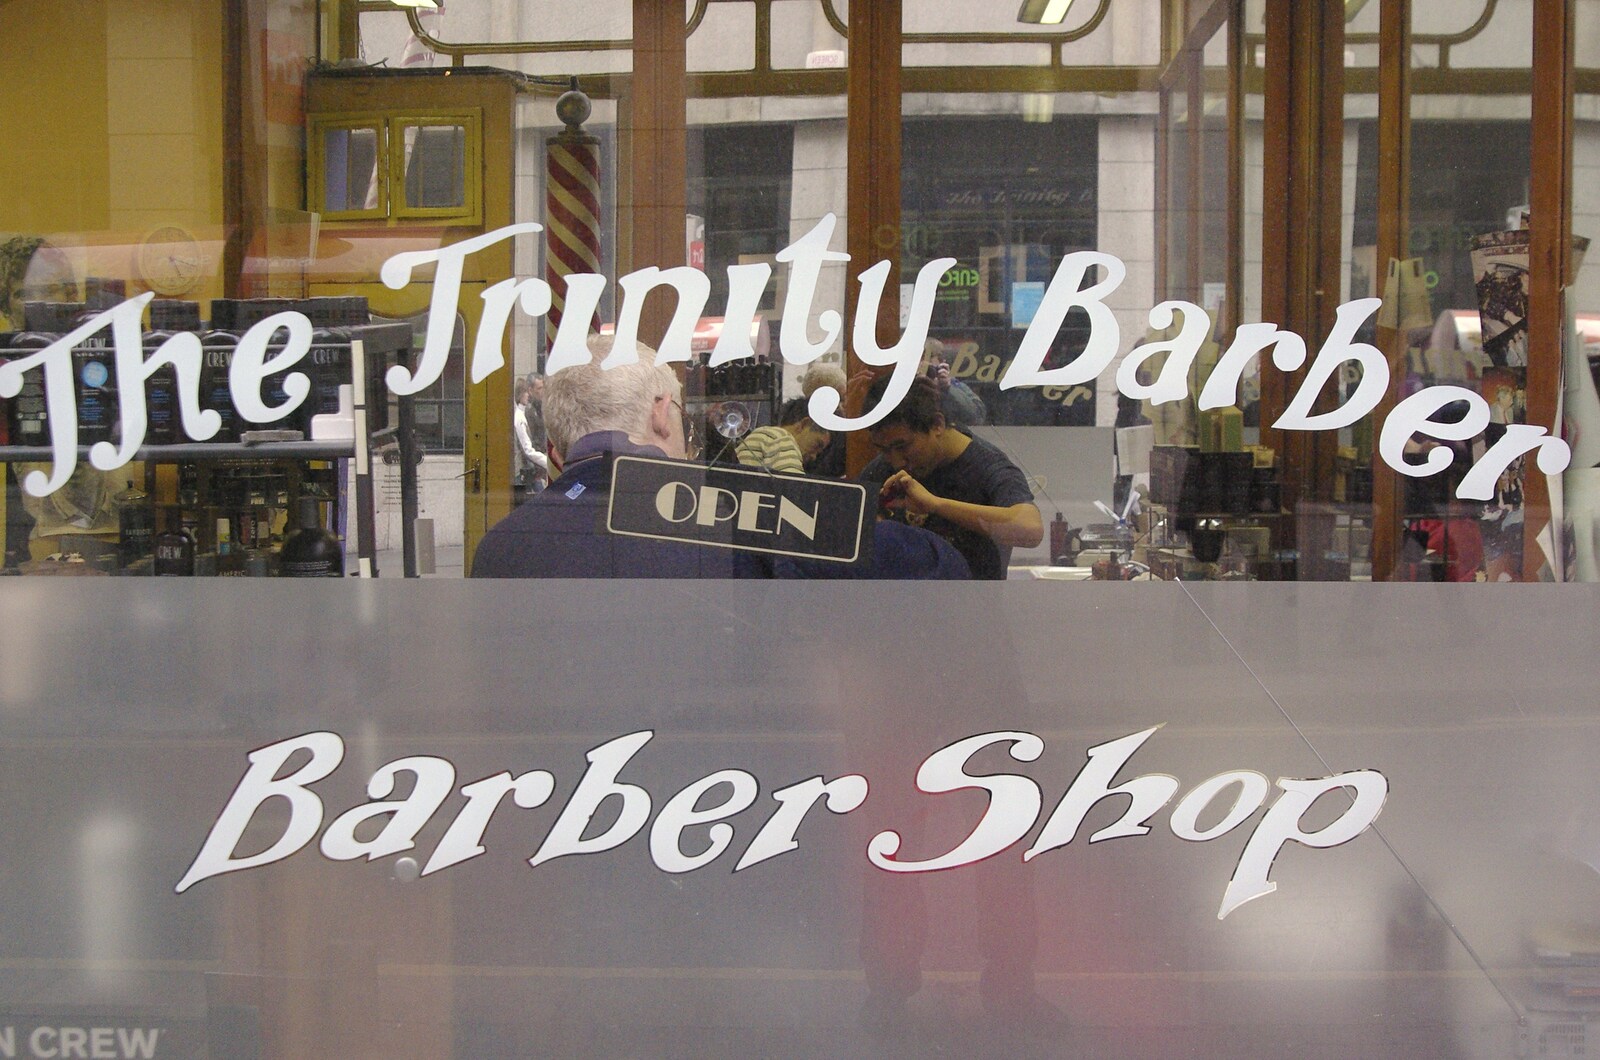 The Trinity Barber Shop from Easter in Dublin, Ireland - 21st March 2008